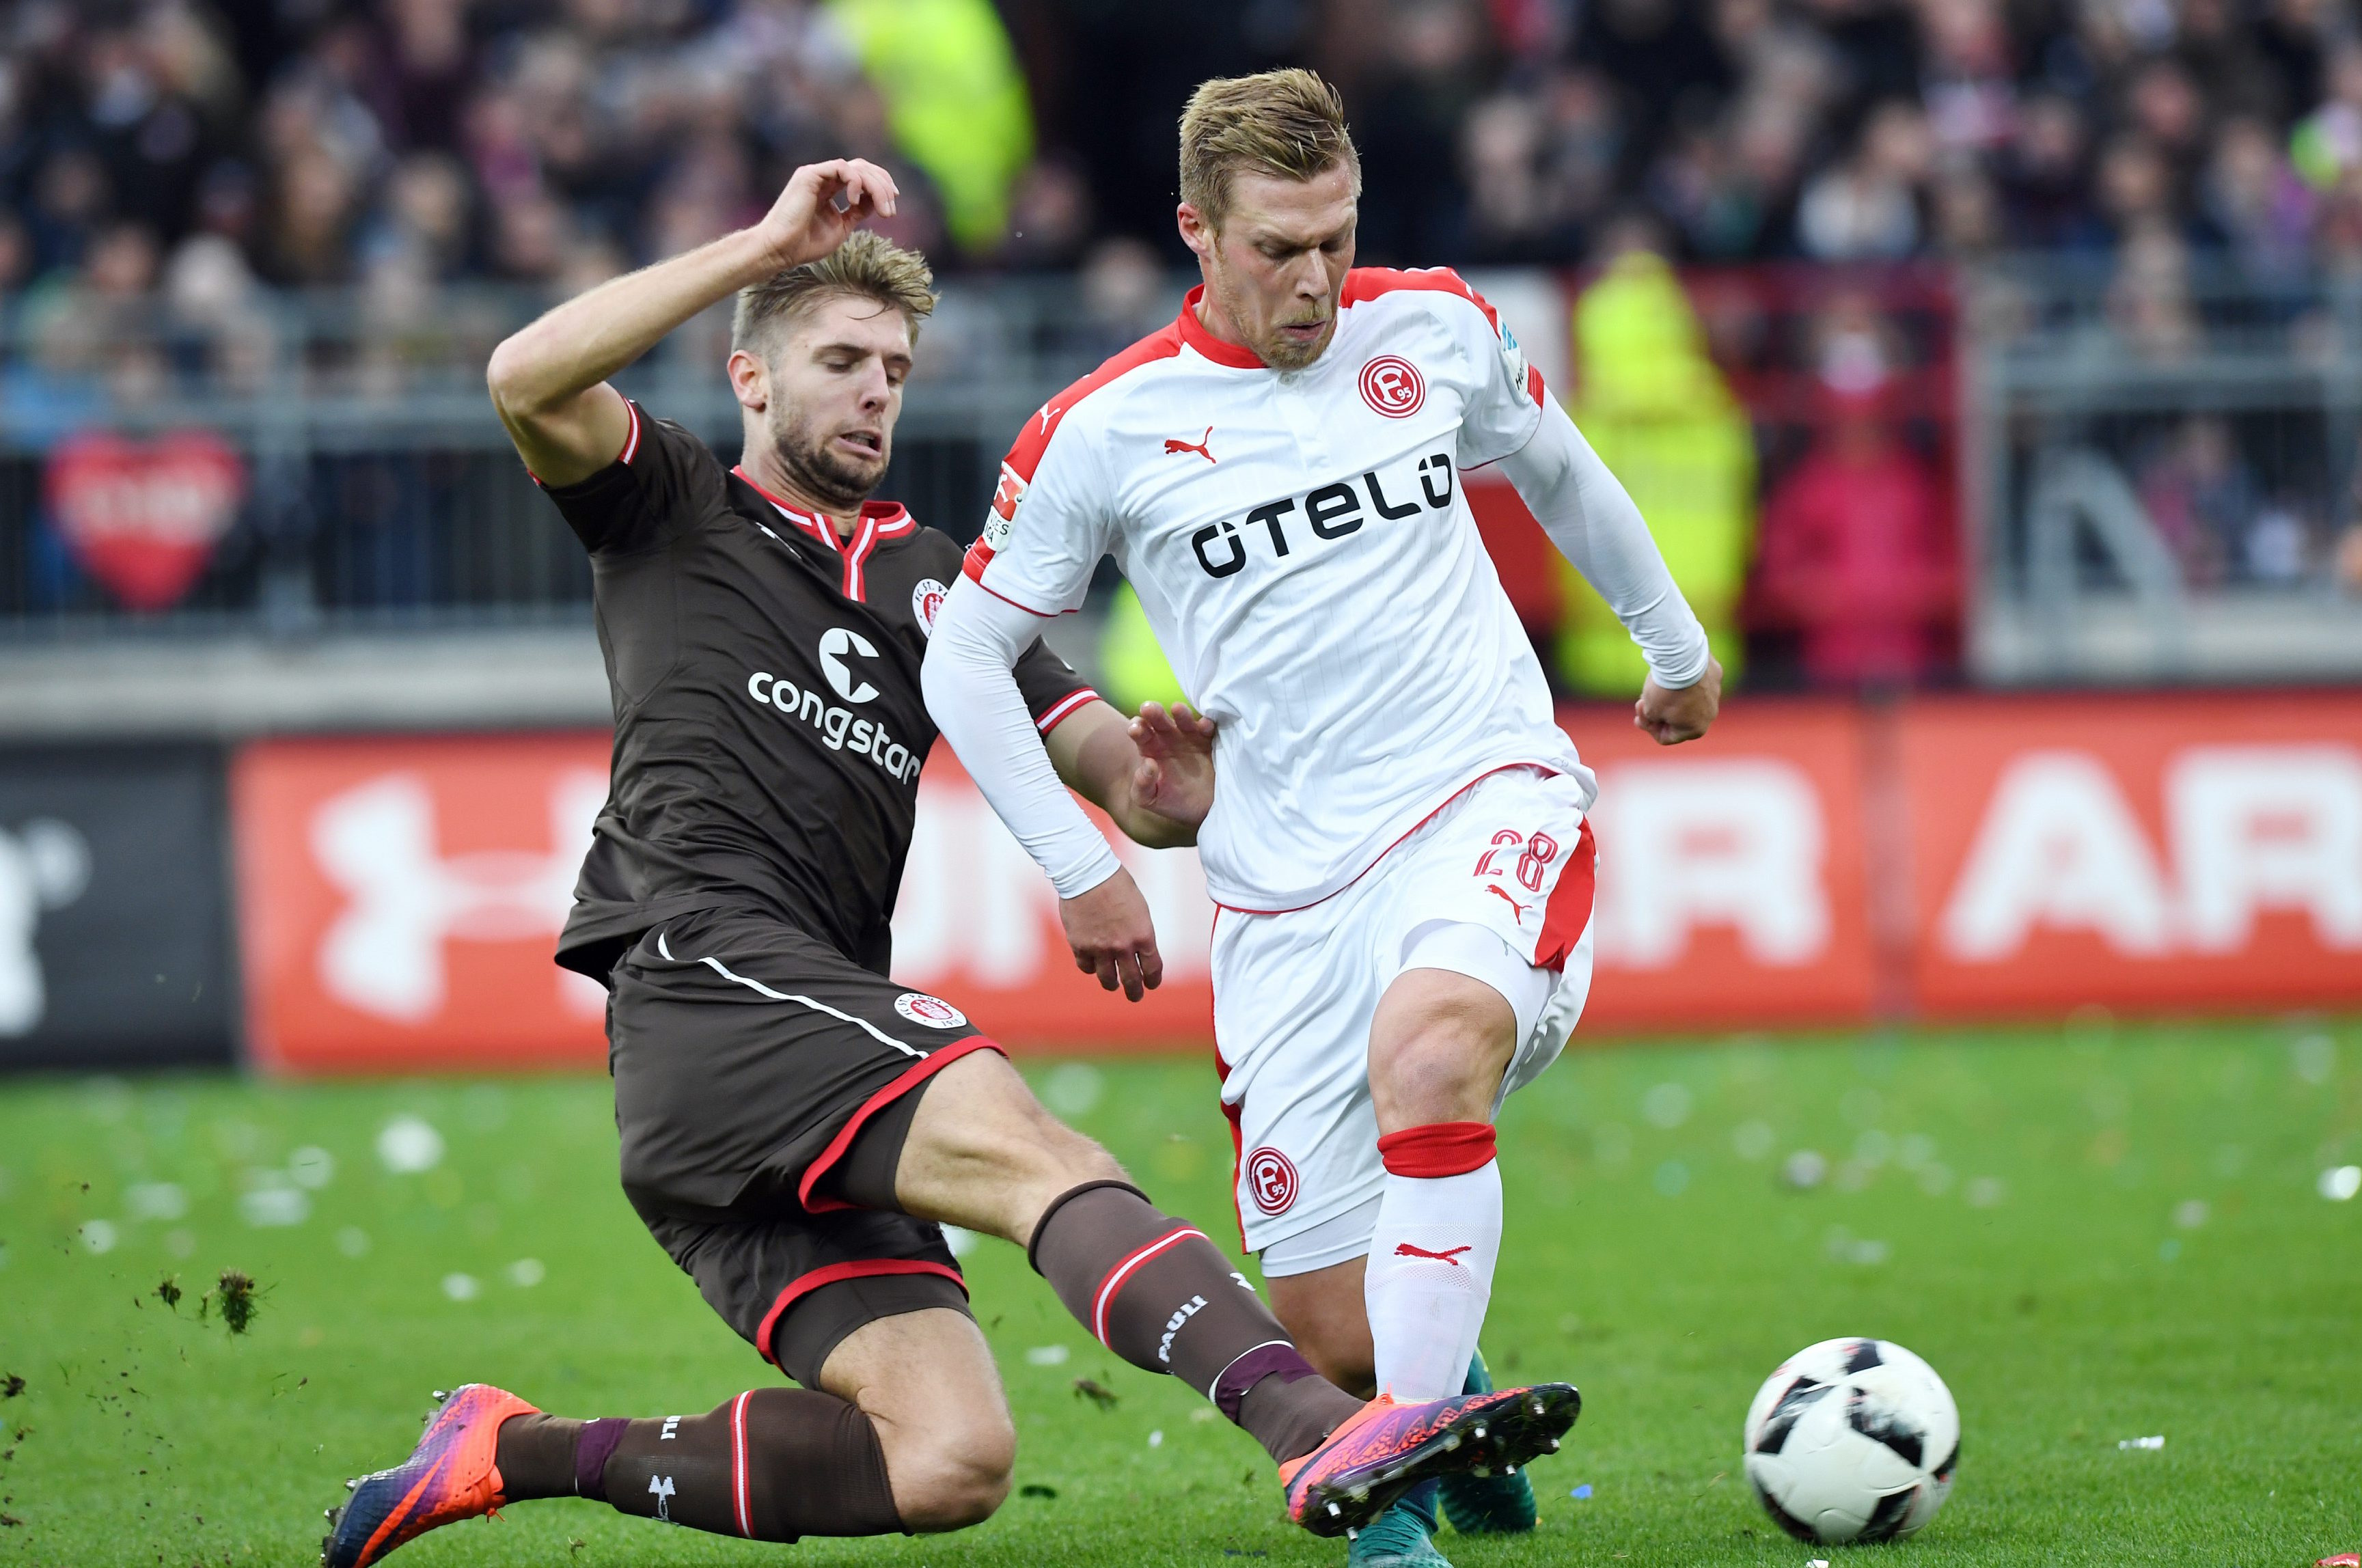 After a hard-fought first half Düsseldorf went in a goal to the good at the break after Daniel Buballa put through his own net.